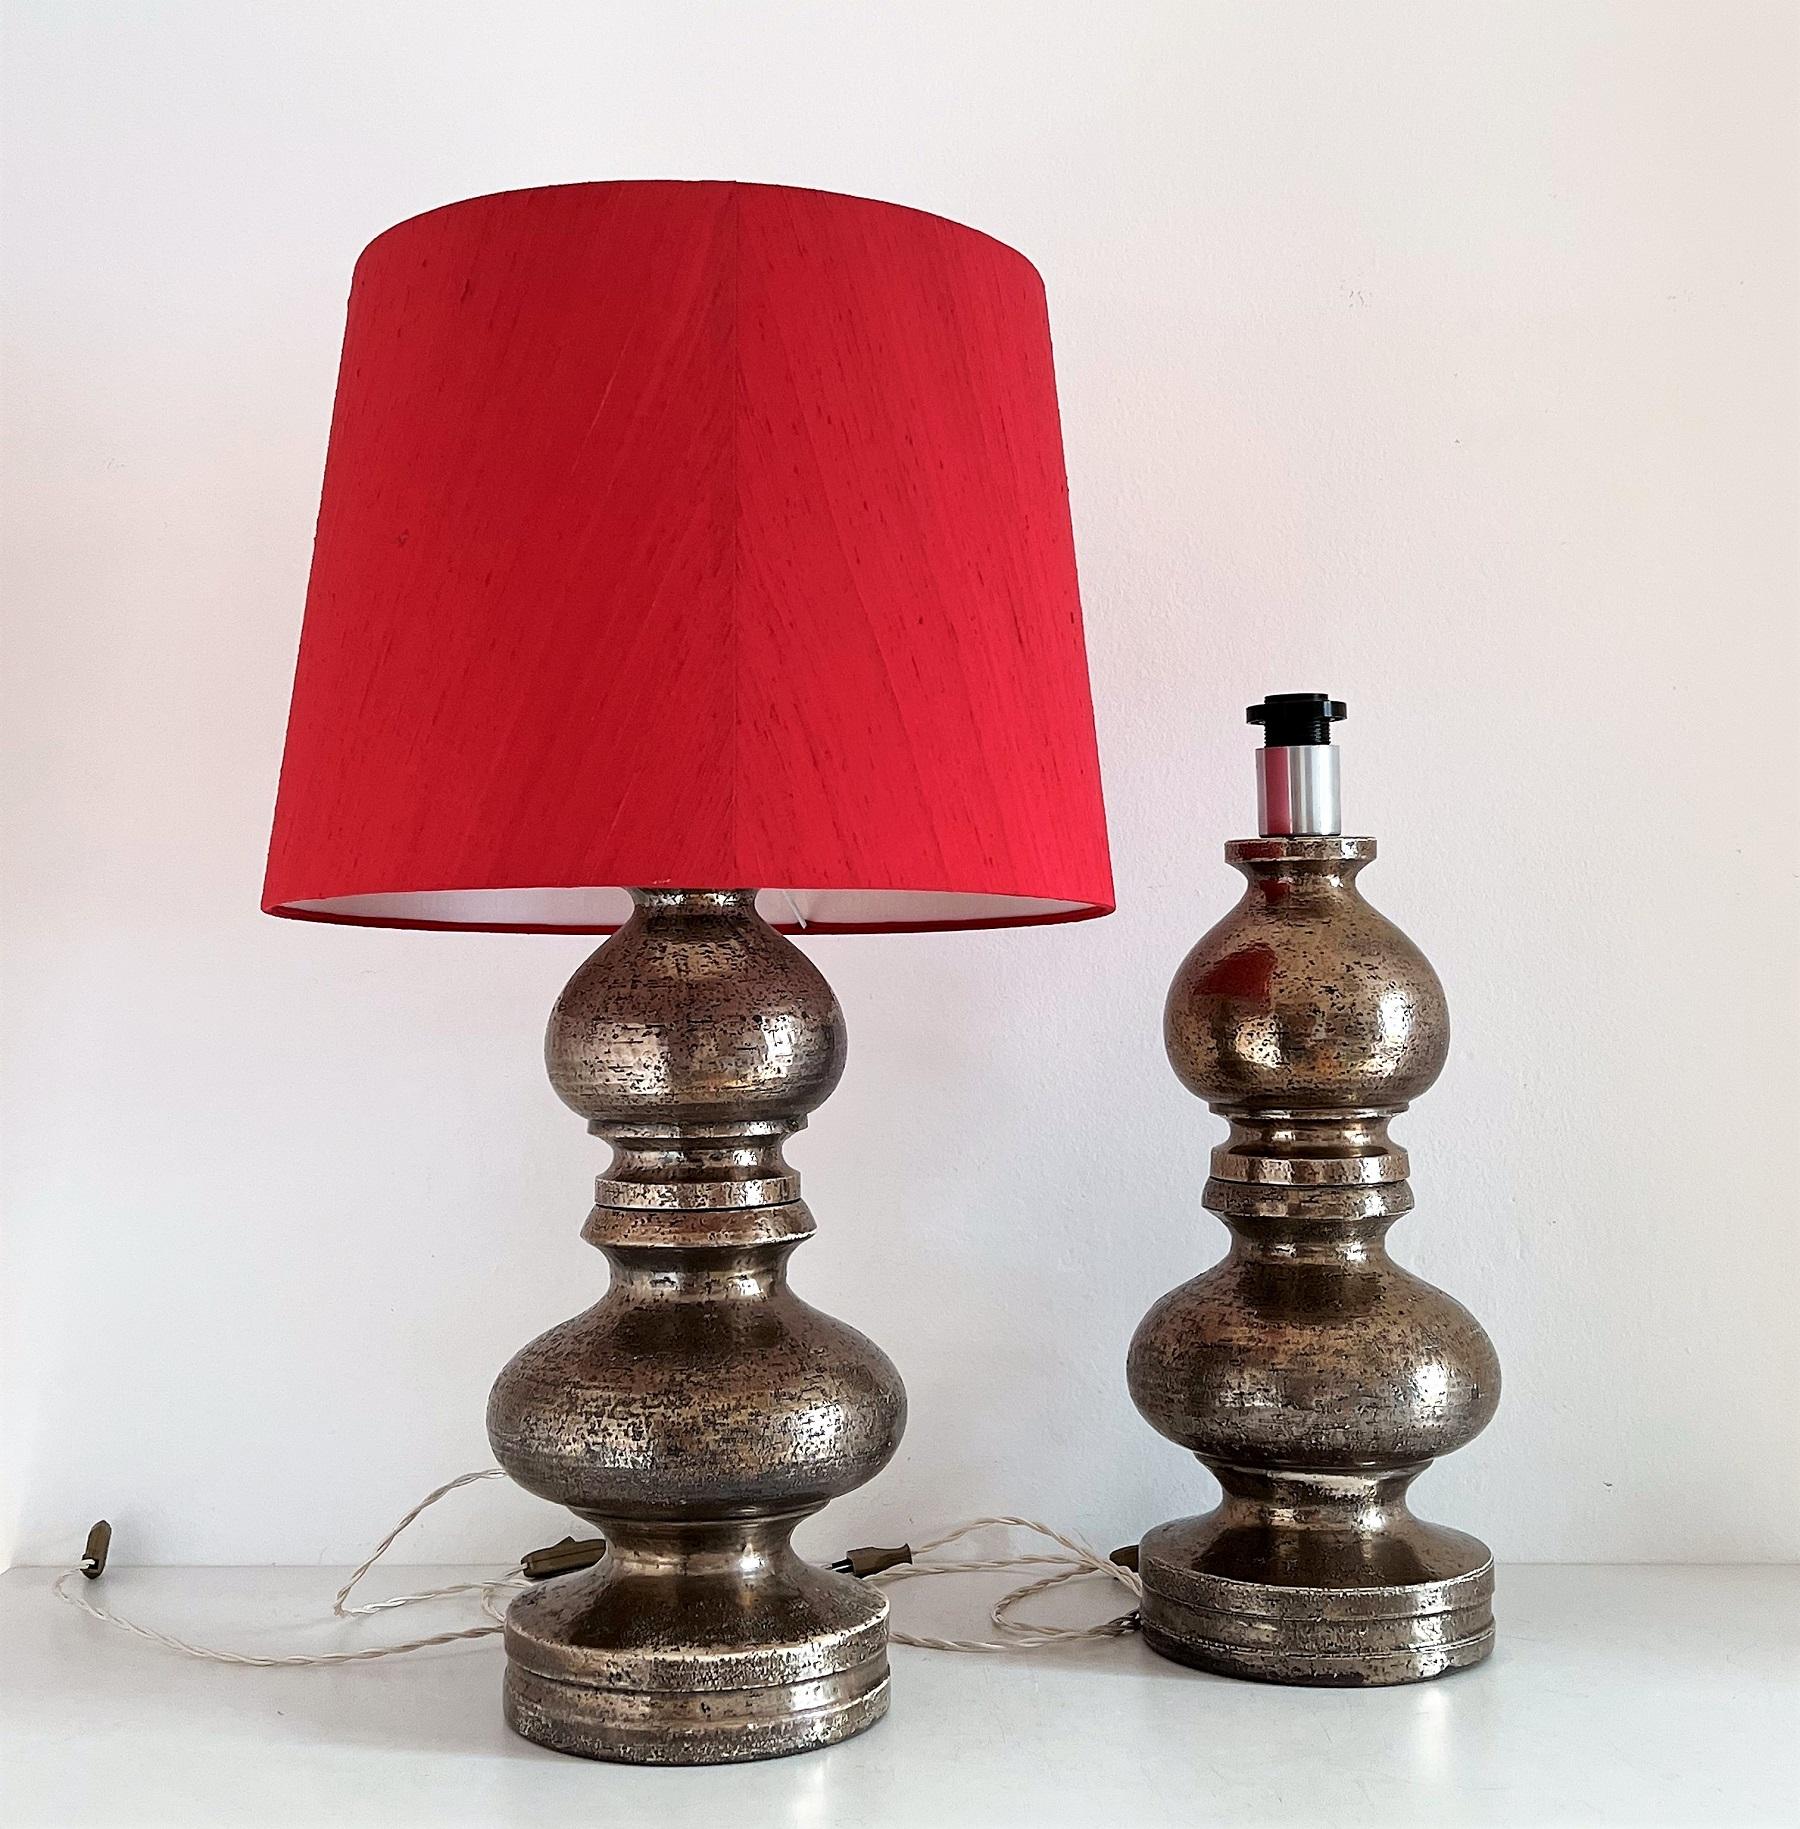 Beautiful and quite rare set of two large pieces pottery lamps designed by Aldo Londi and made by Bitossi, Italy, during the 1960s.
Made of heavy pottery - ceramic and glazed in gorgeous shiny silver or platinum color.
Both lamps are 100%